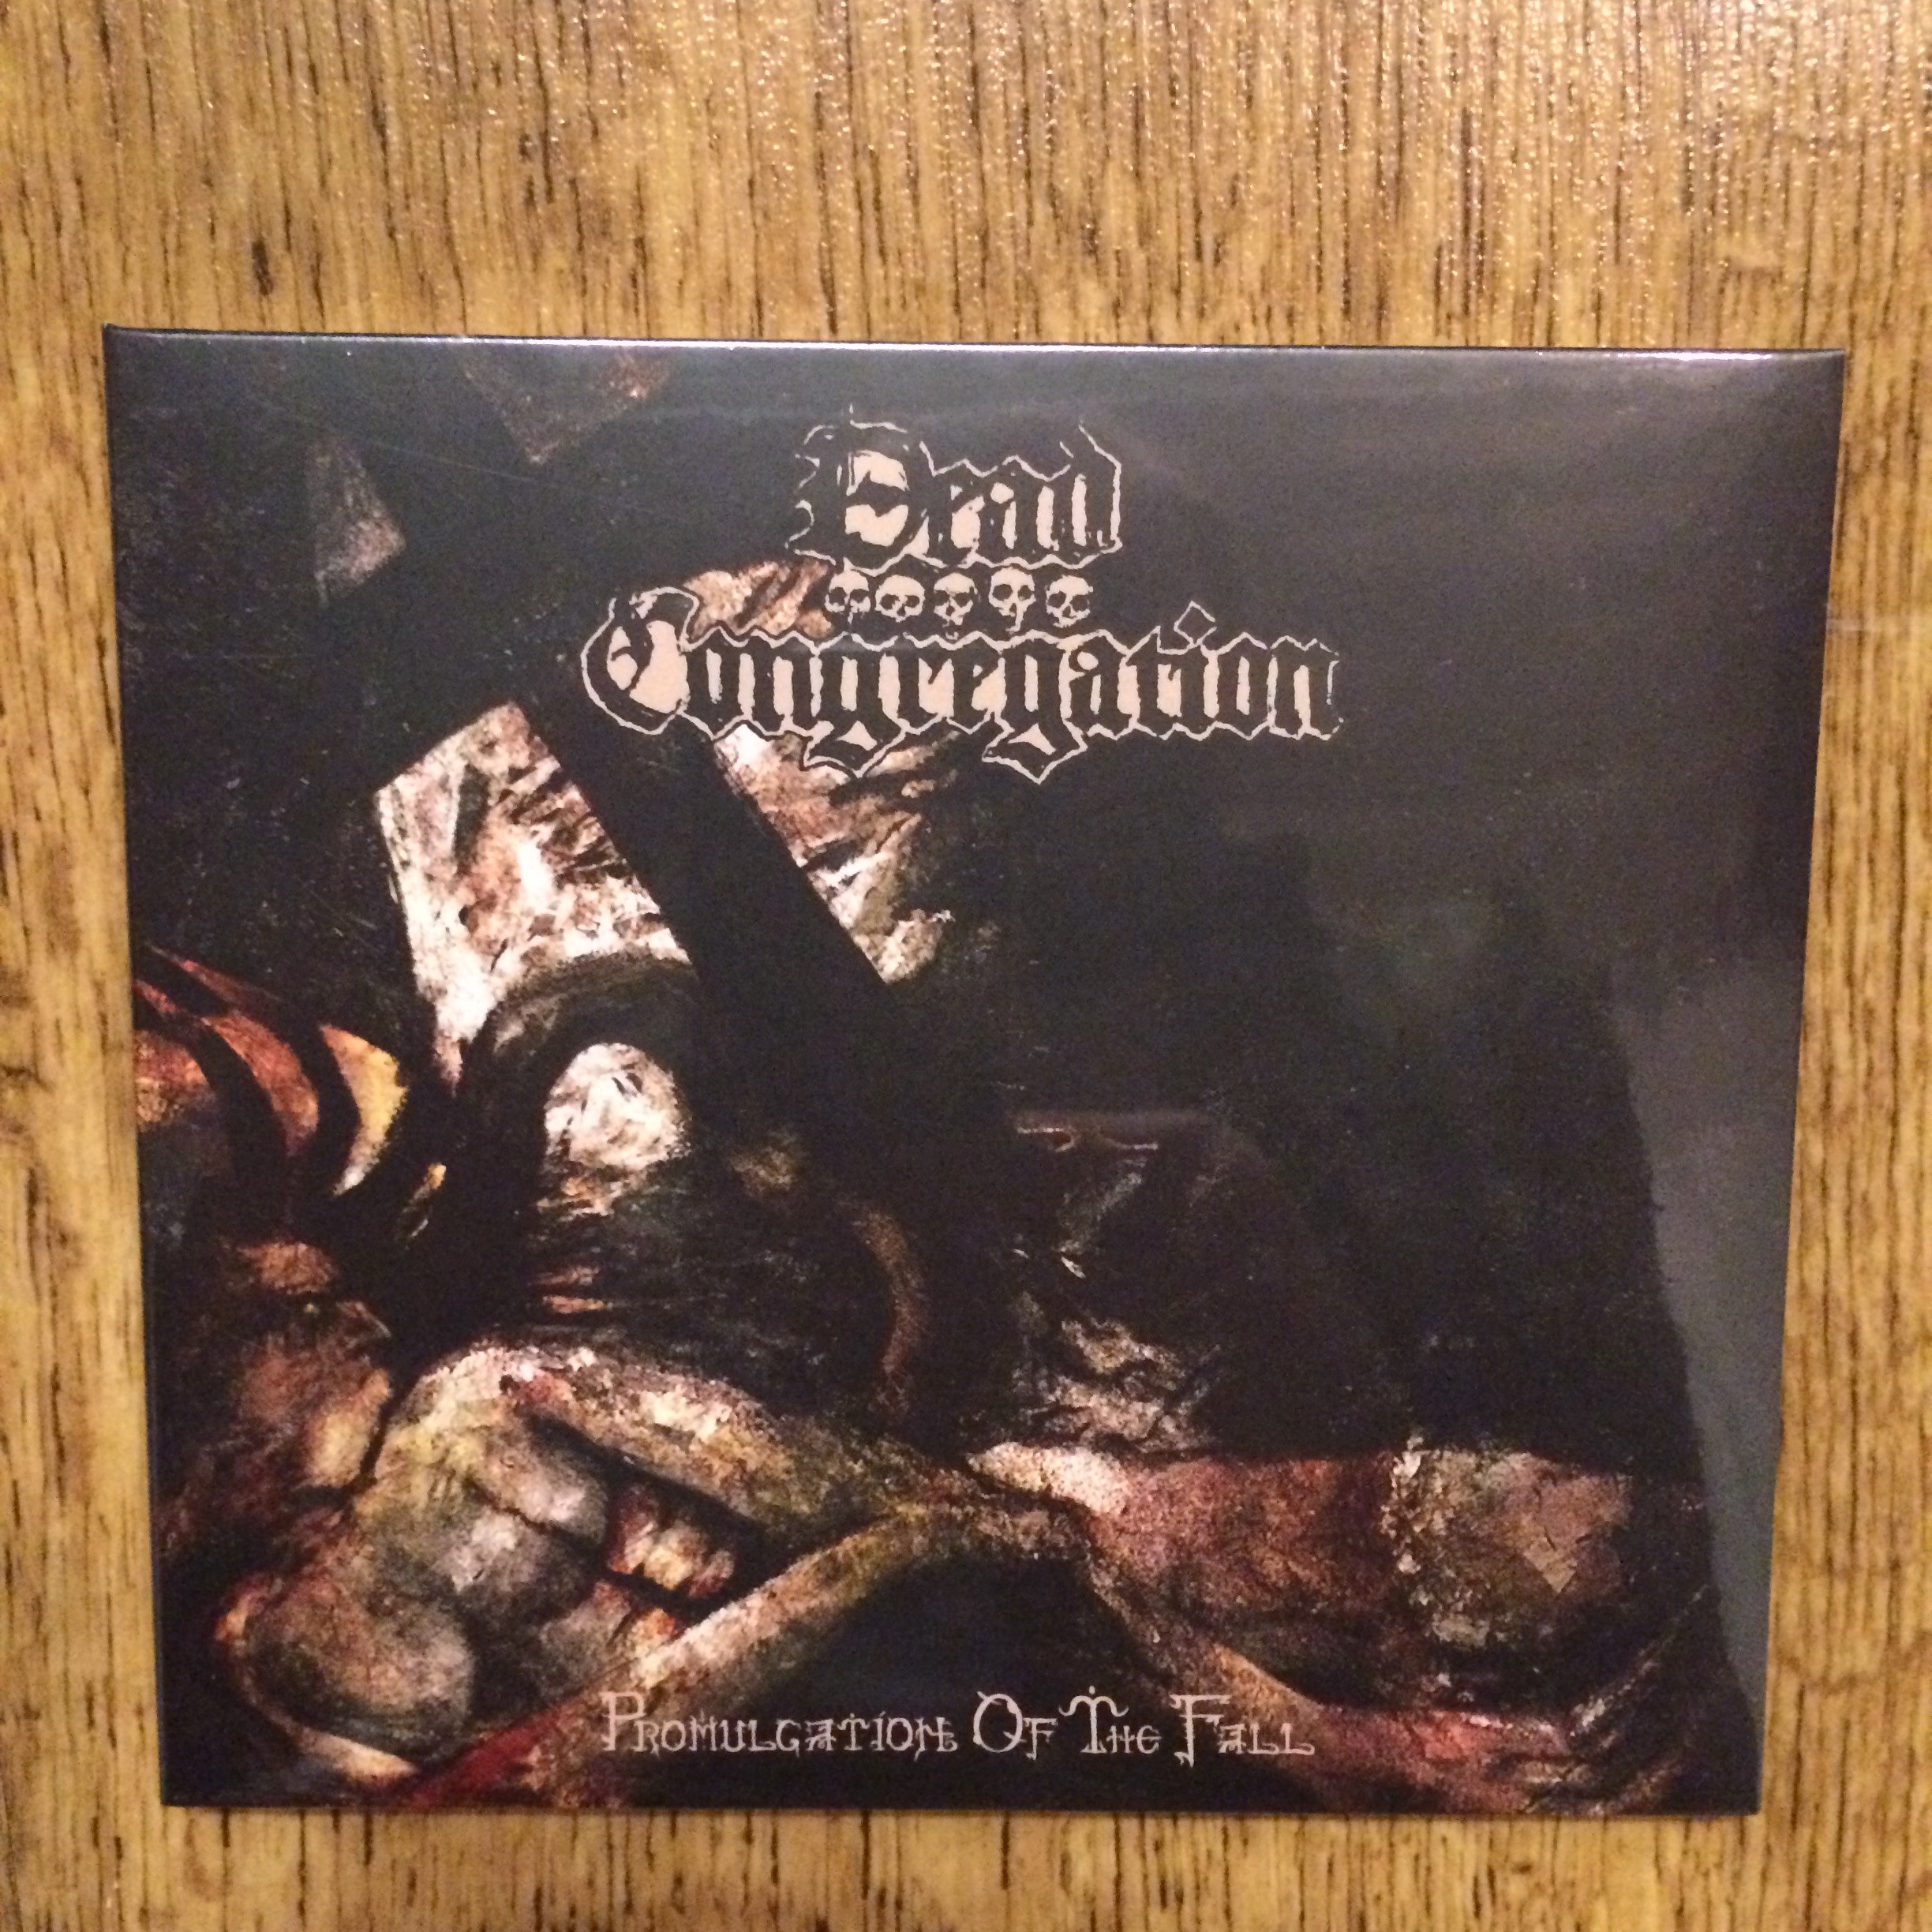 Photo of the Dead Congregation - "Promulgation of the Fall" CD